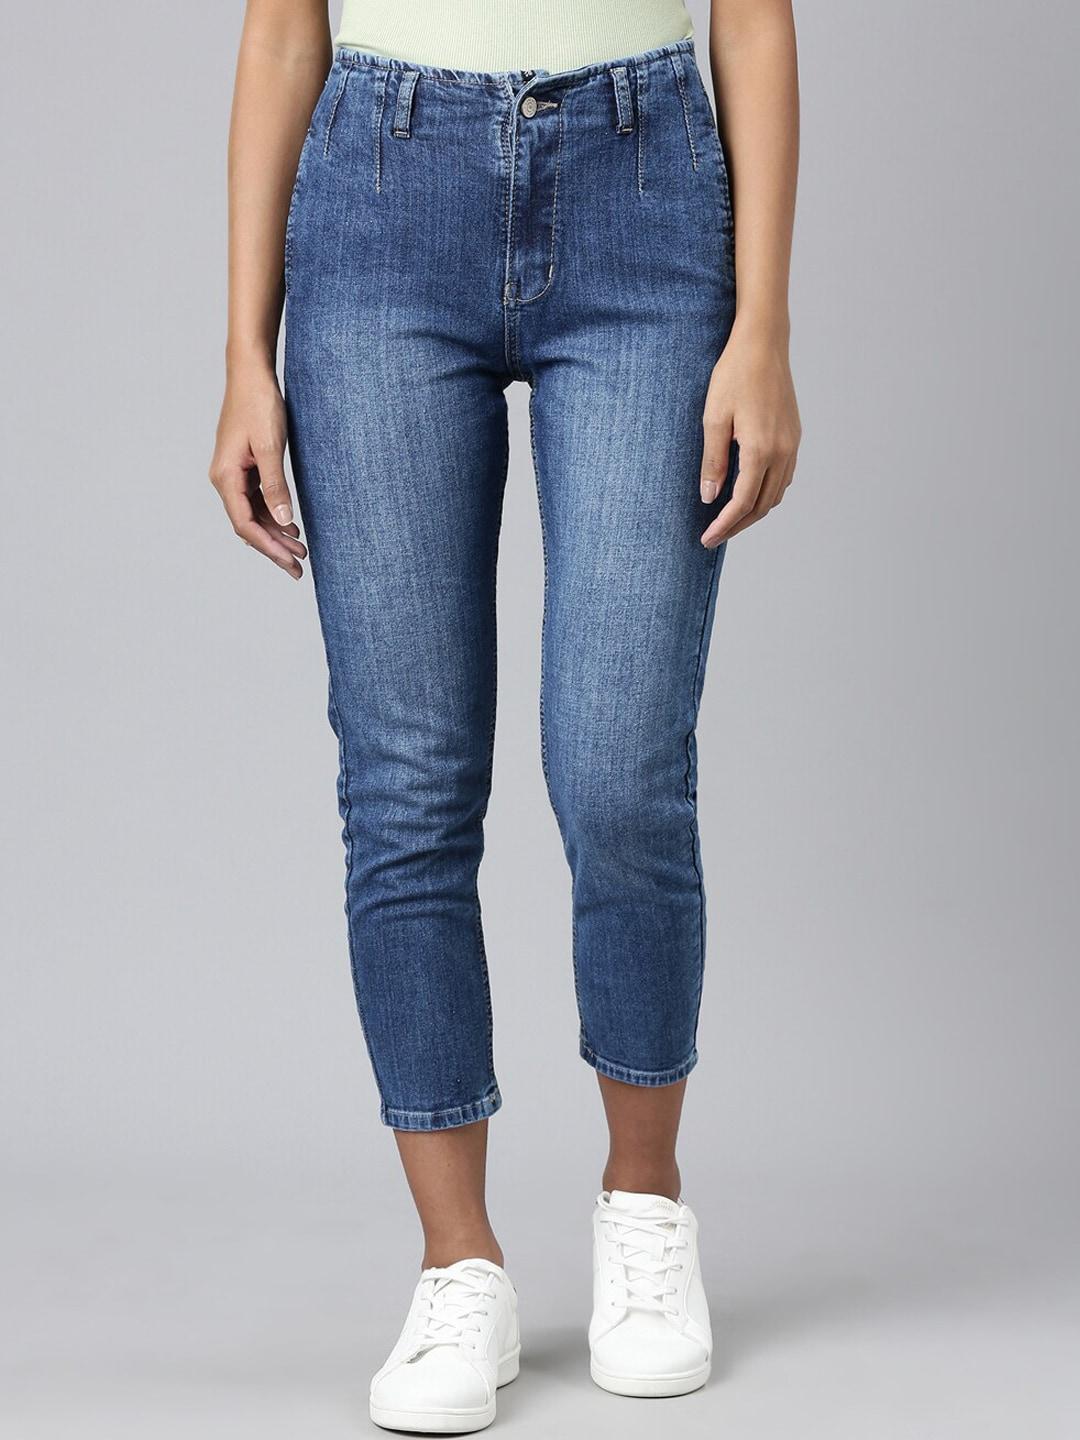 showoff-women-mom-fit-clean-look-light-fade-stretchable-jeans